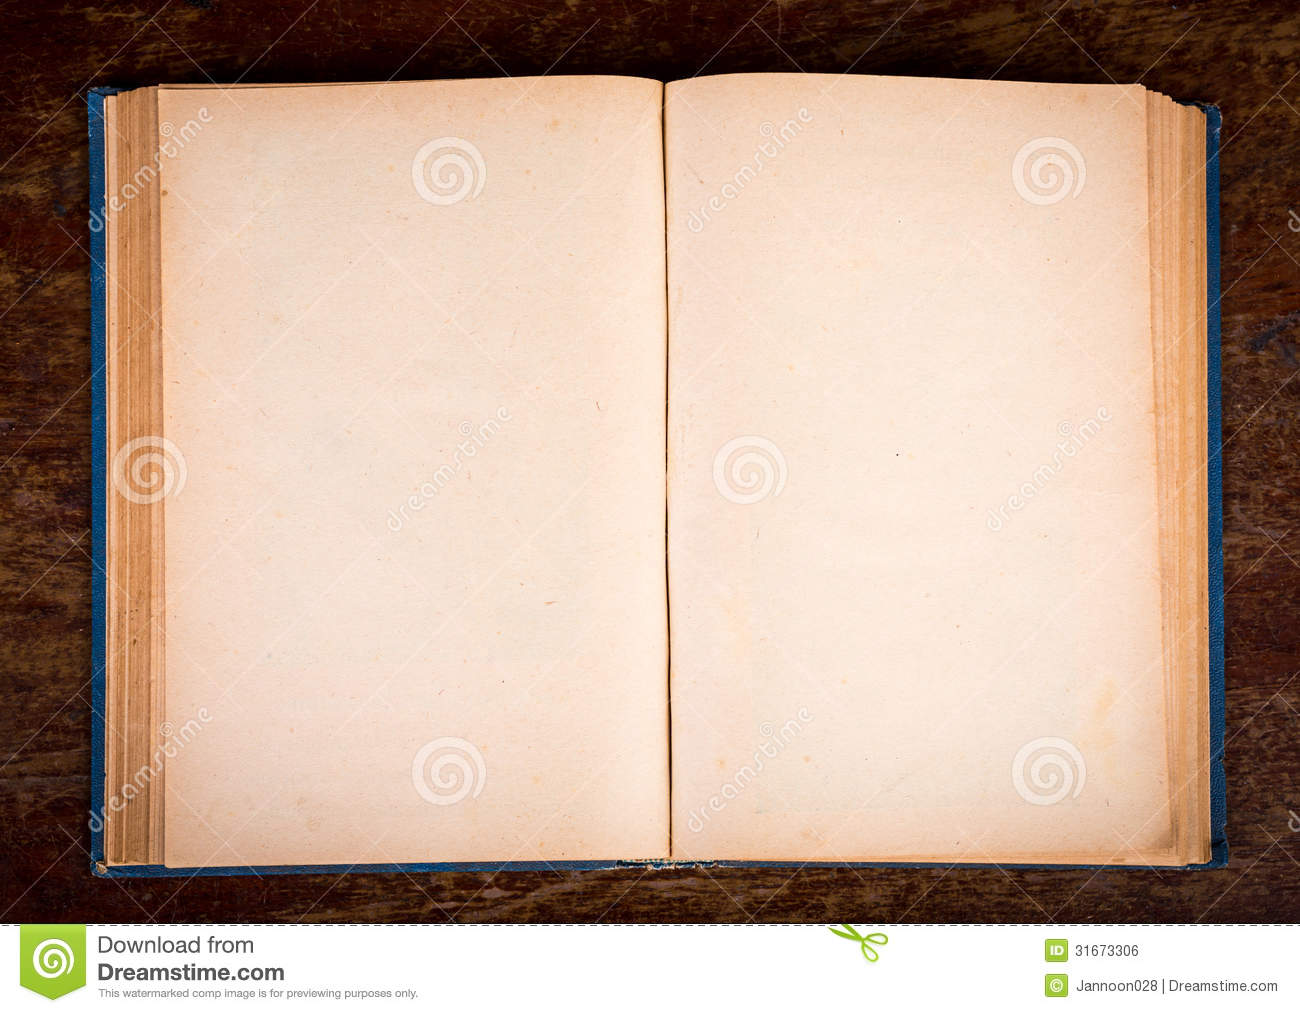 Open Old Vintage Book Royalty Free Stock Image   Image  31673306